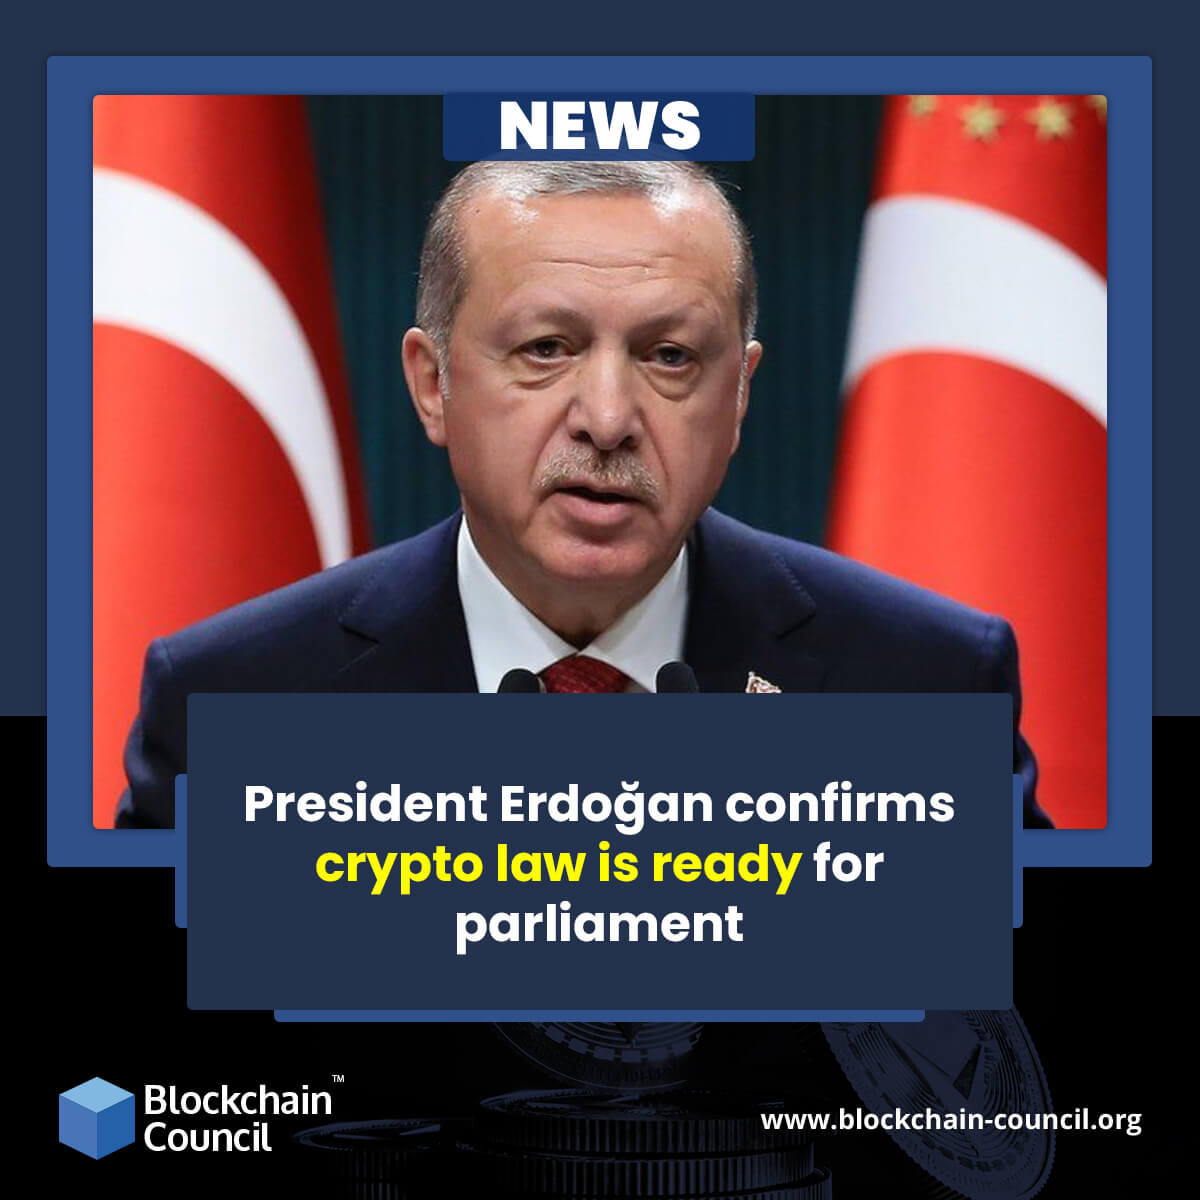 President Erdoğan confirms crypto law is ready for parliament